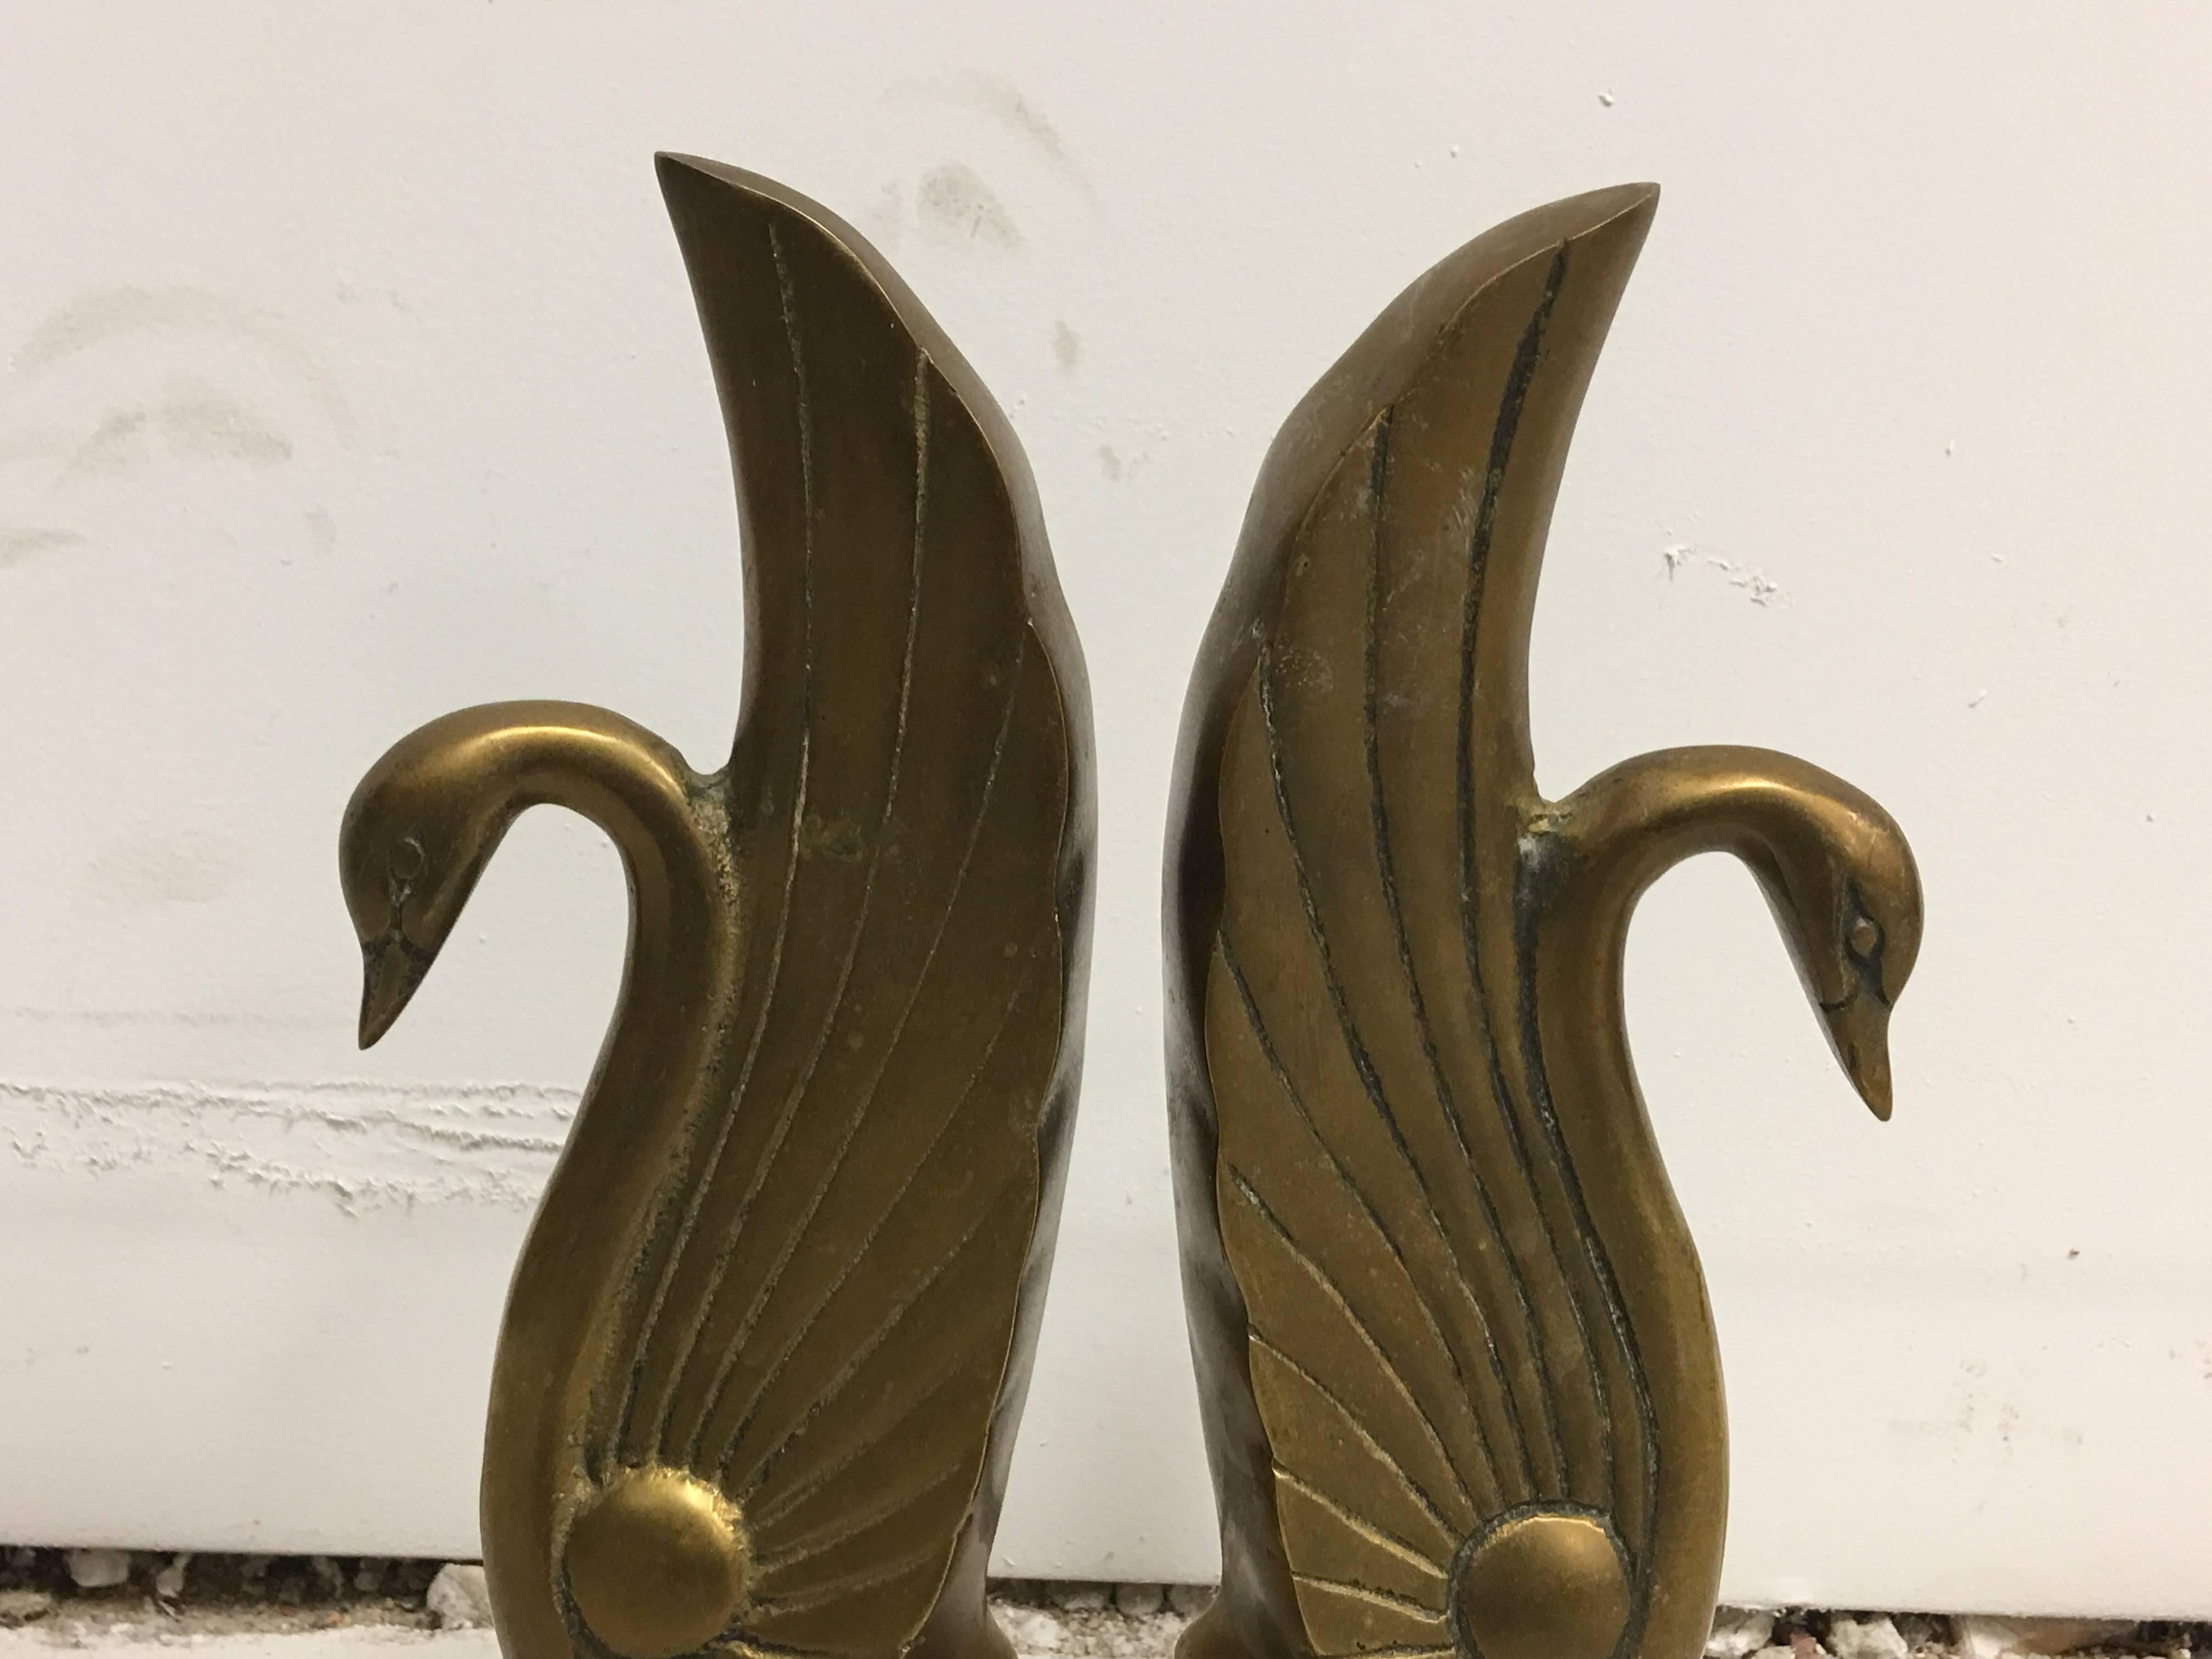 Offered is a gorgeous, pair of 1920s Art Deco solid-brass swan bookends.